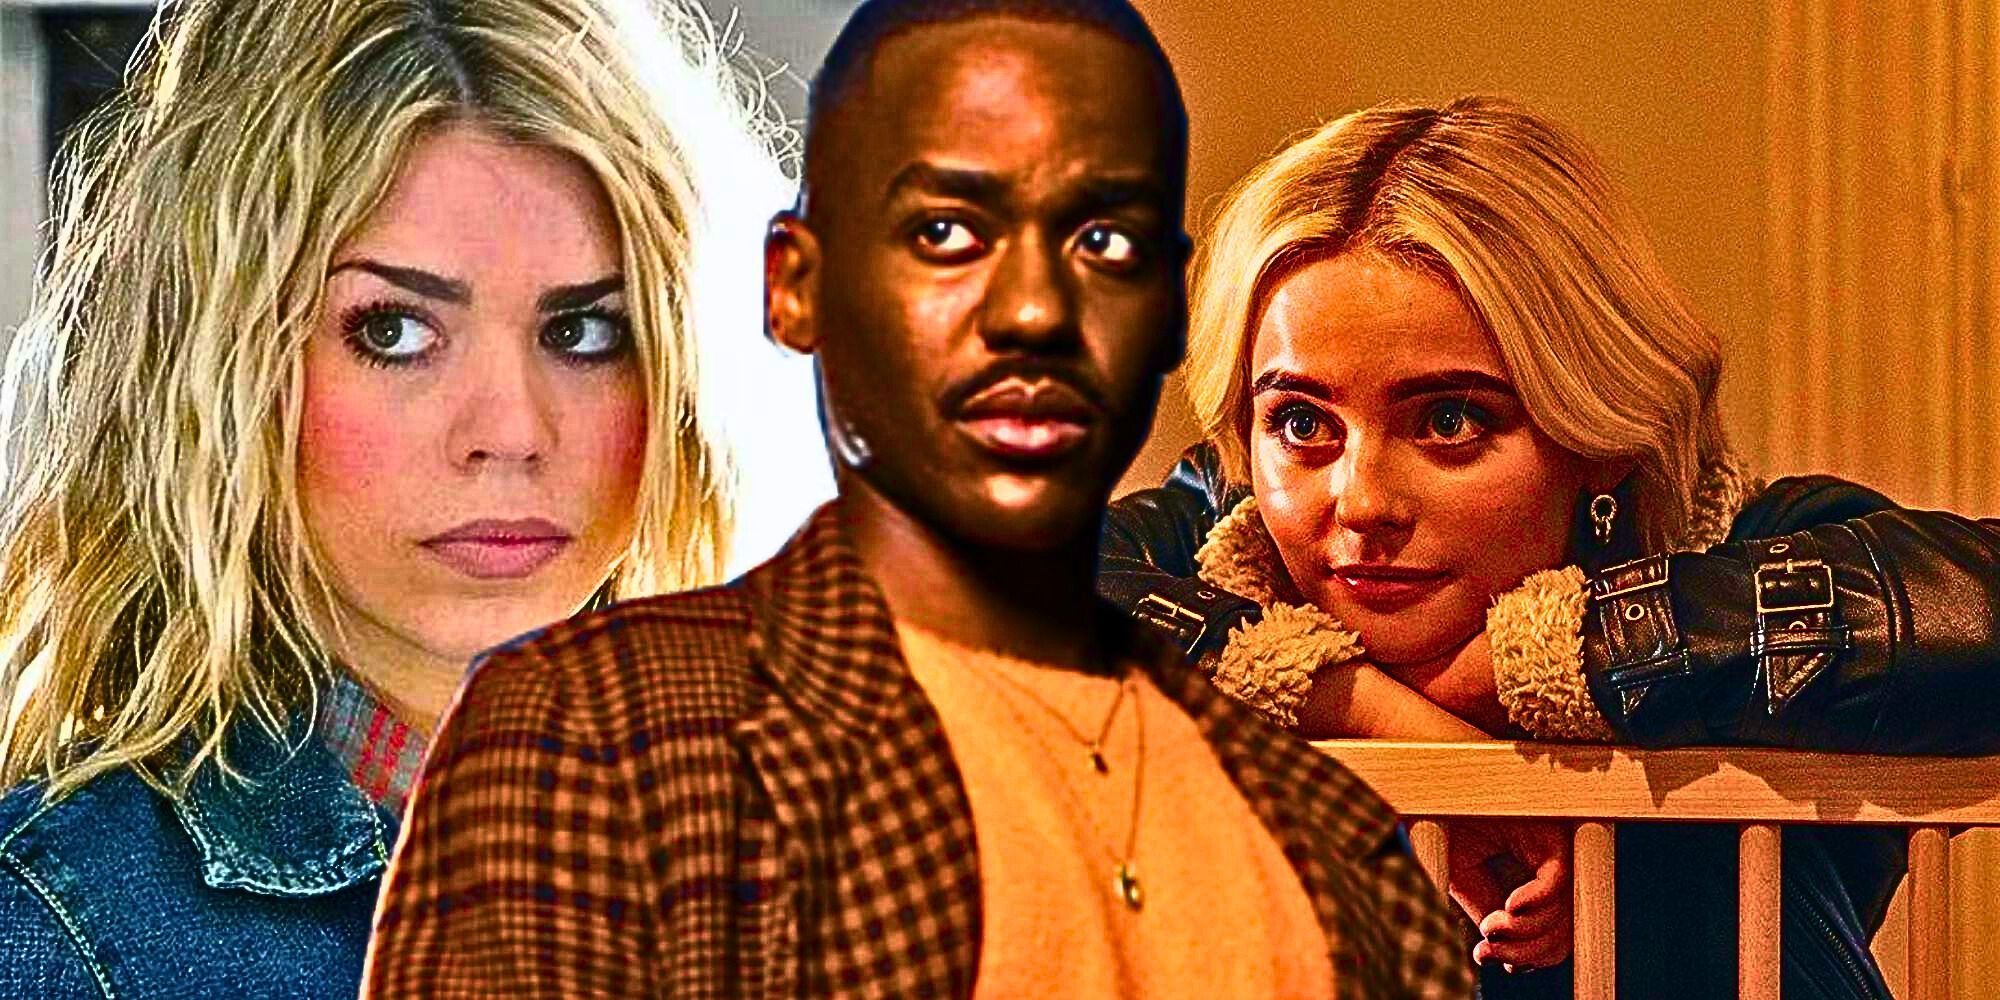 A custom Doctor Who image of Billie Piper as Rose Tyler, Ncuti Gatwa as the Fifteenth Doctor, and Millie Gibson as Ruby Sunday